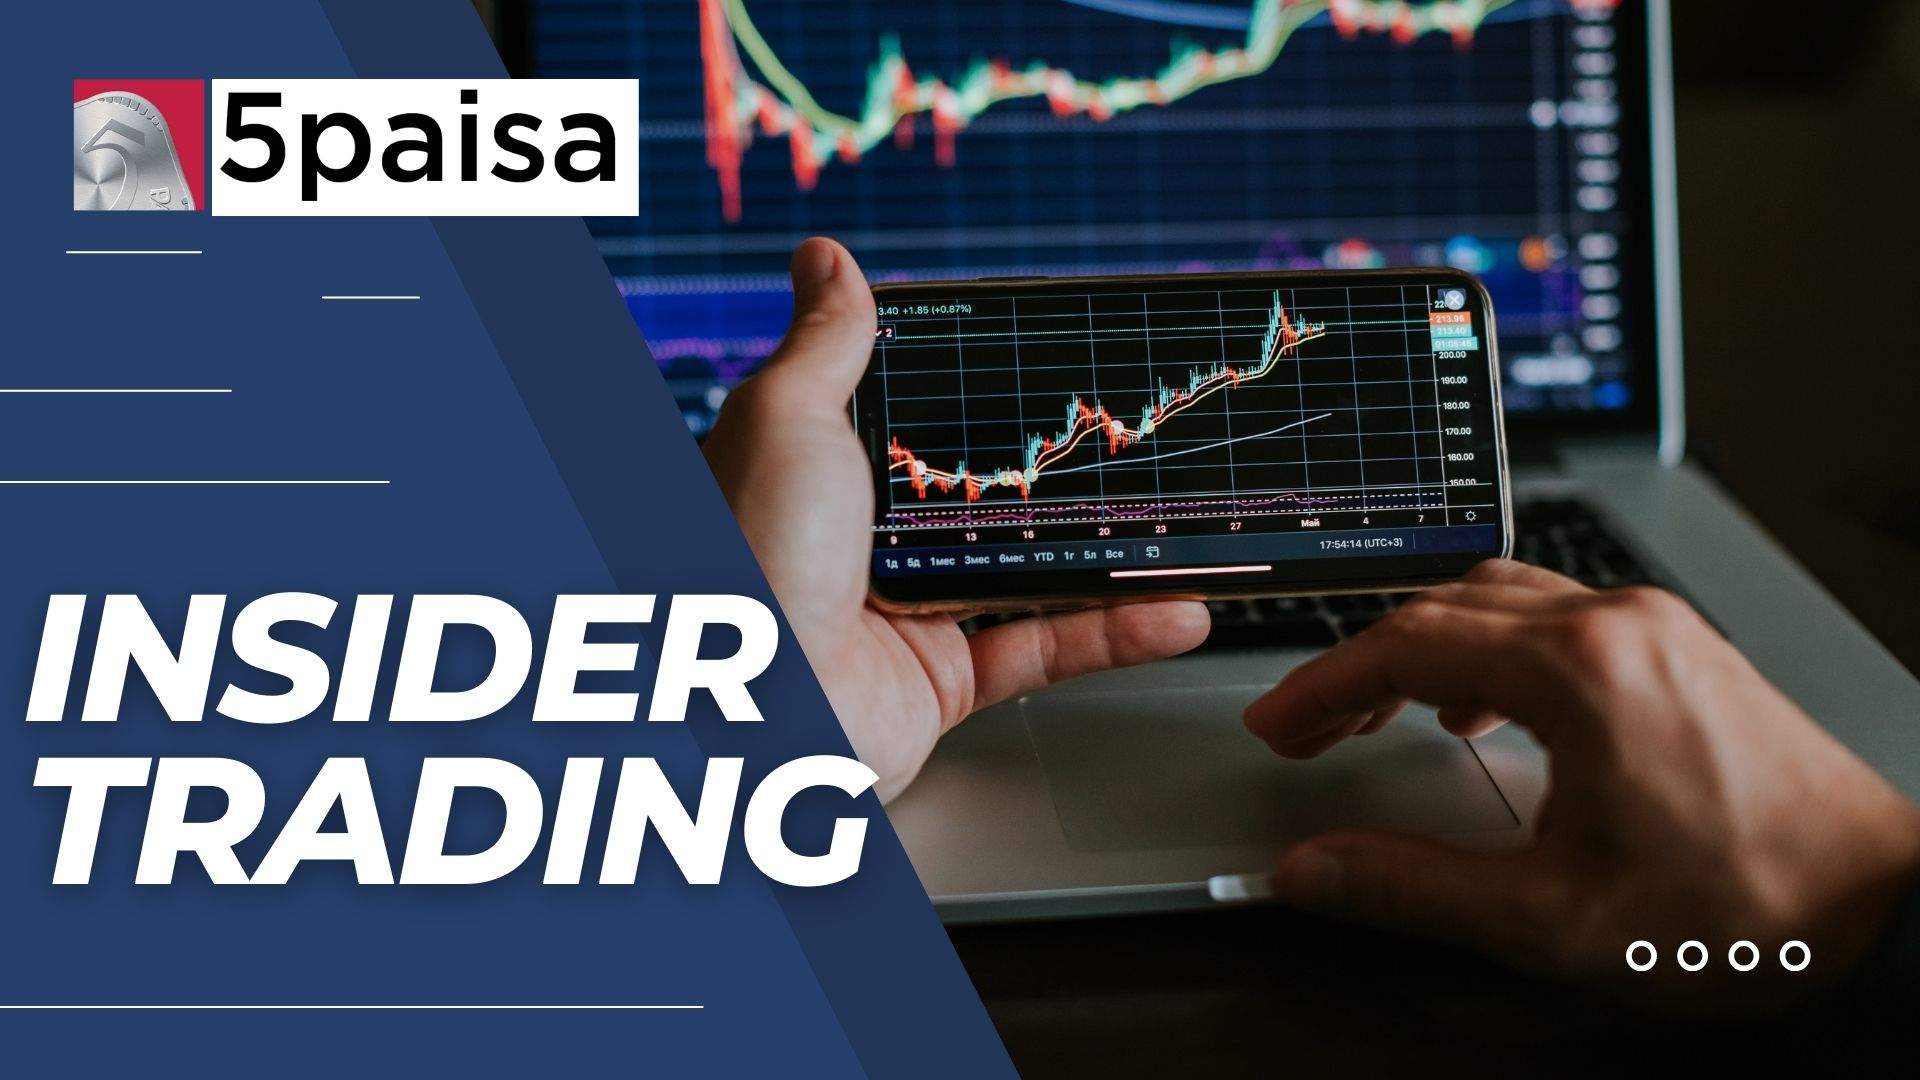 What is Insider Trading